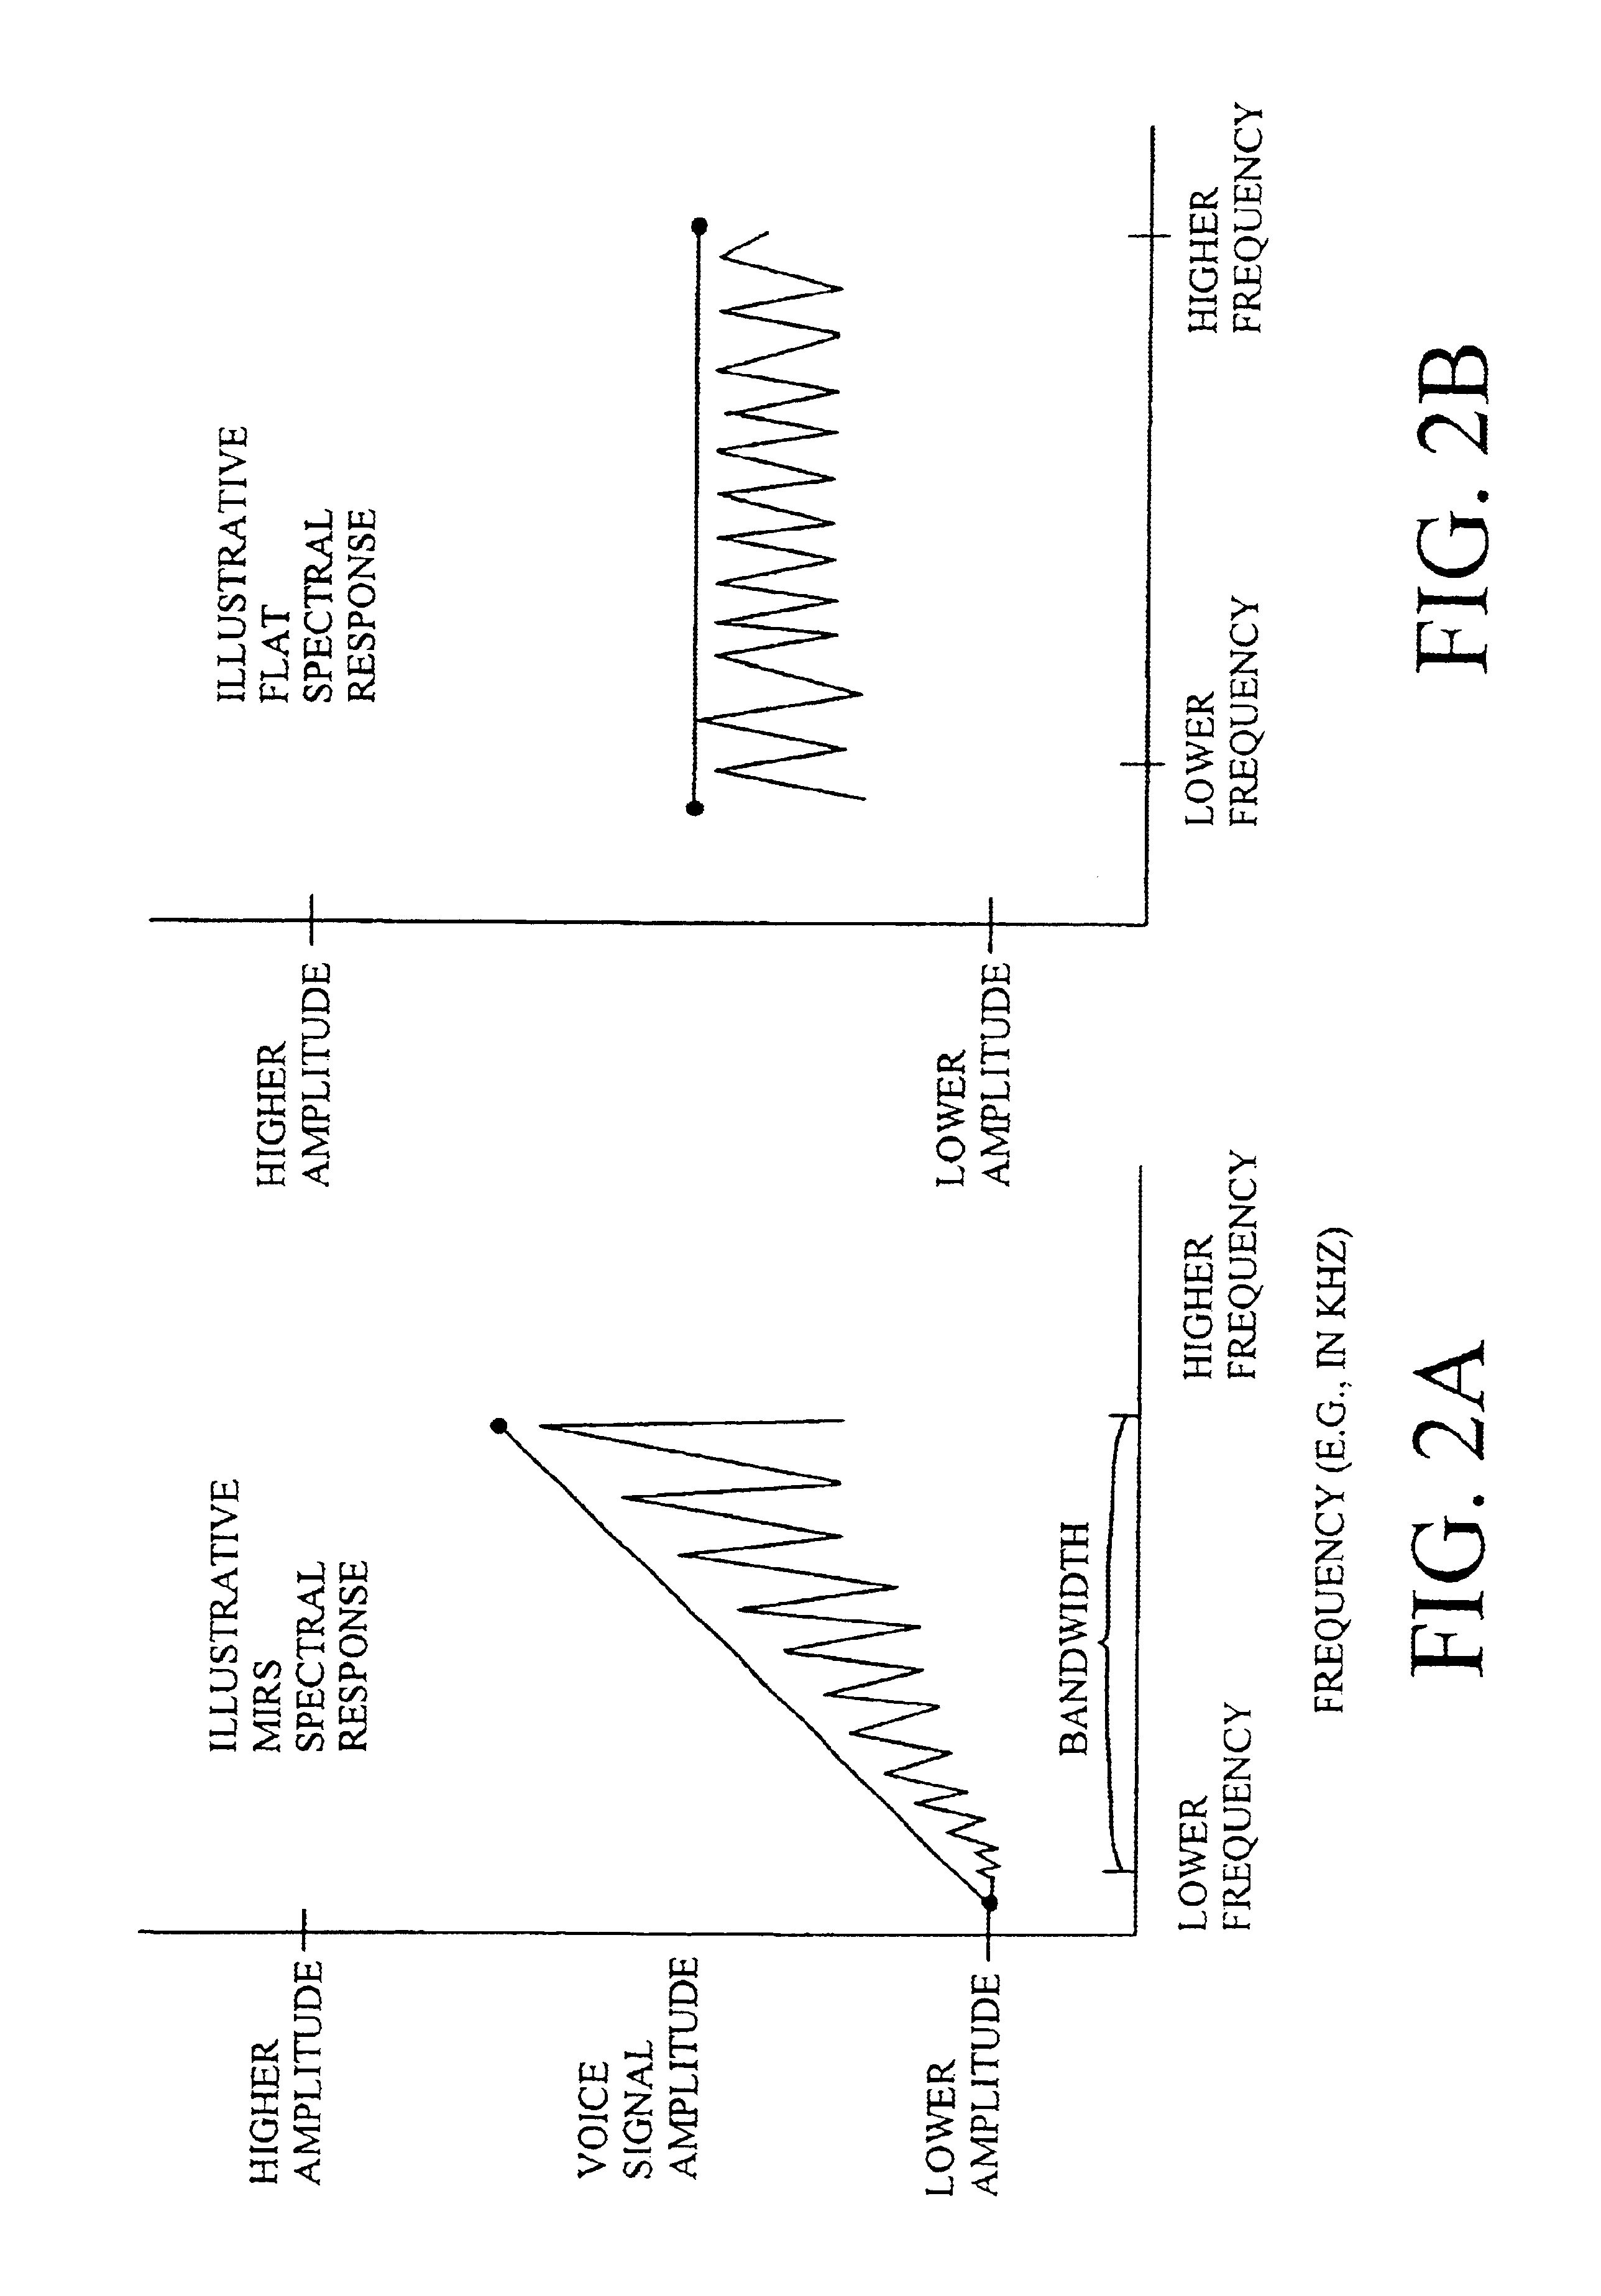 Selection of coding parameters based on spectral content of a speech signal